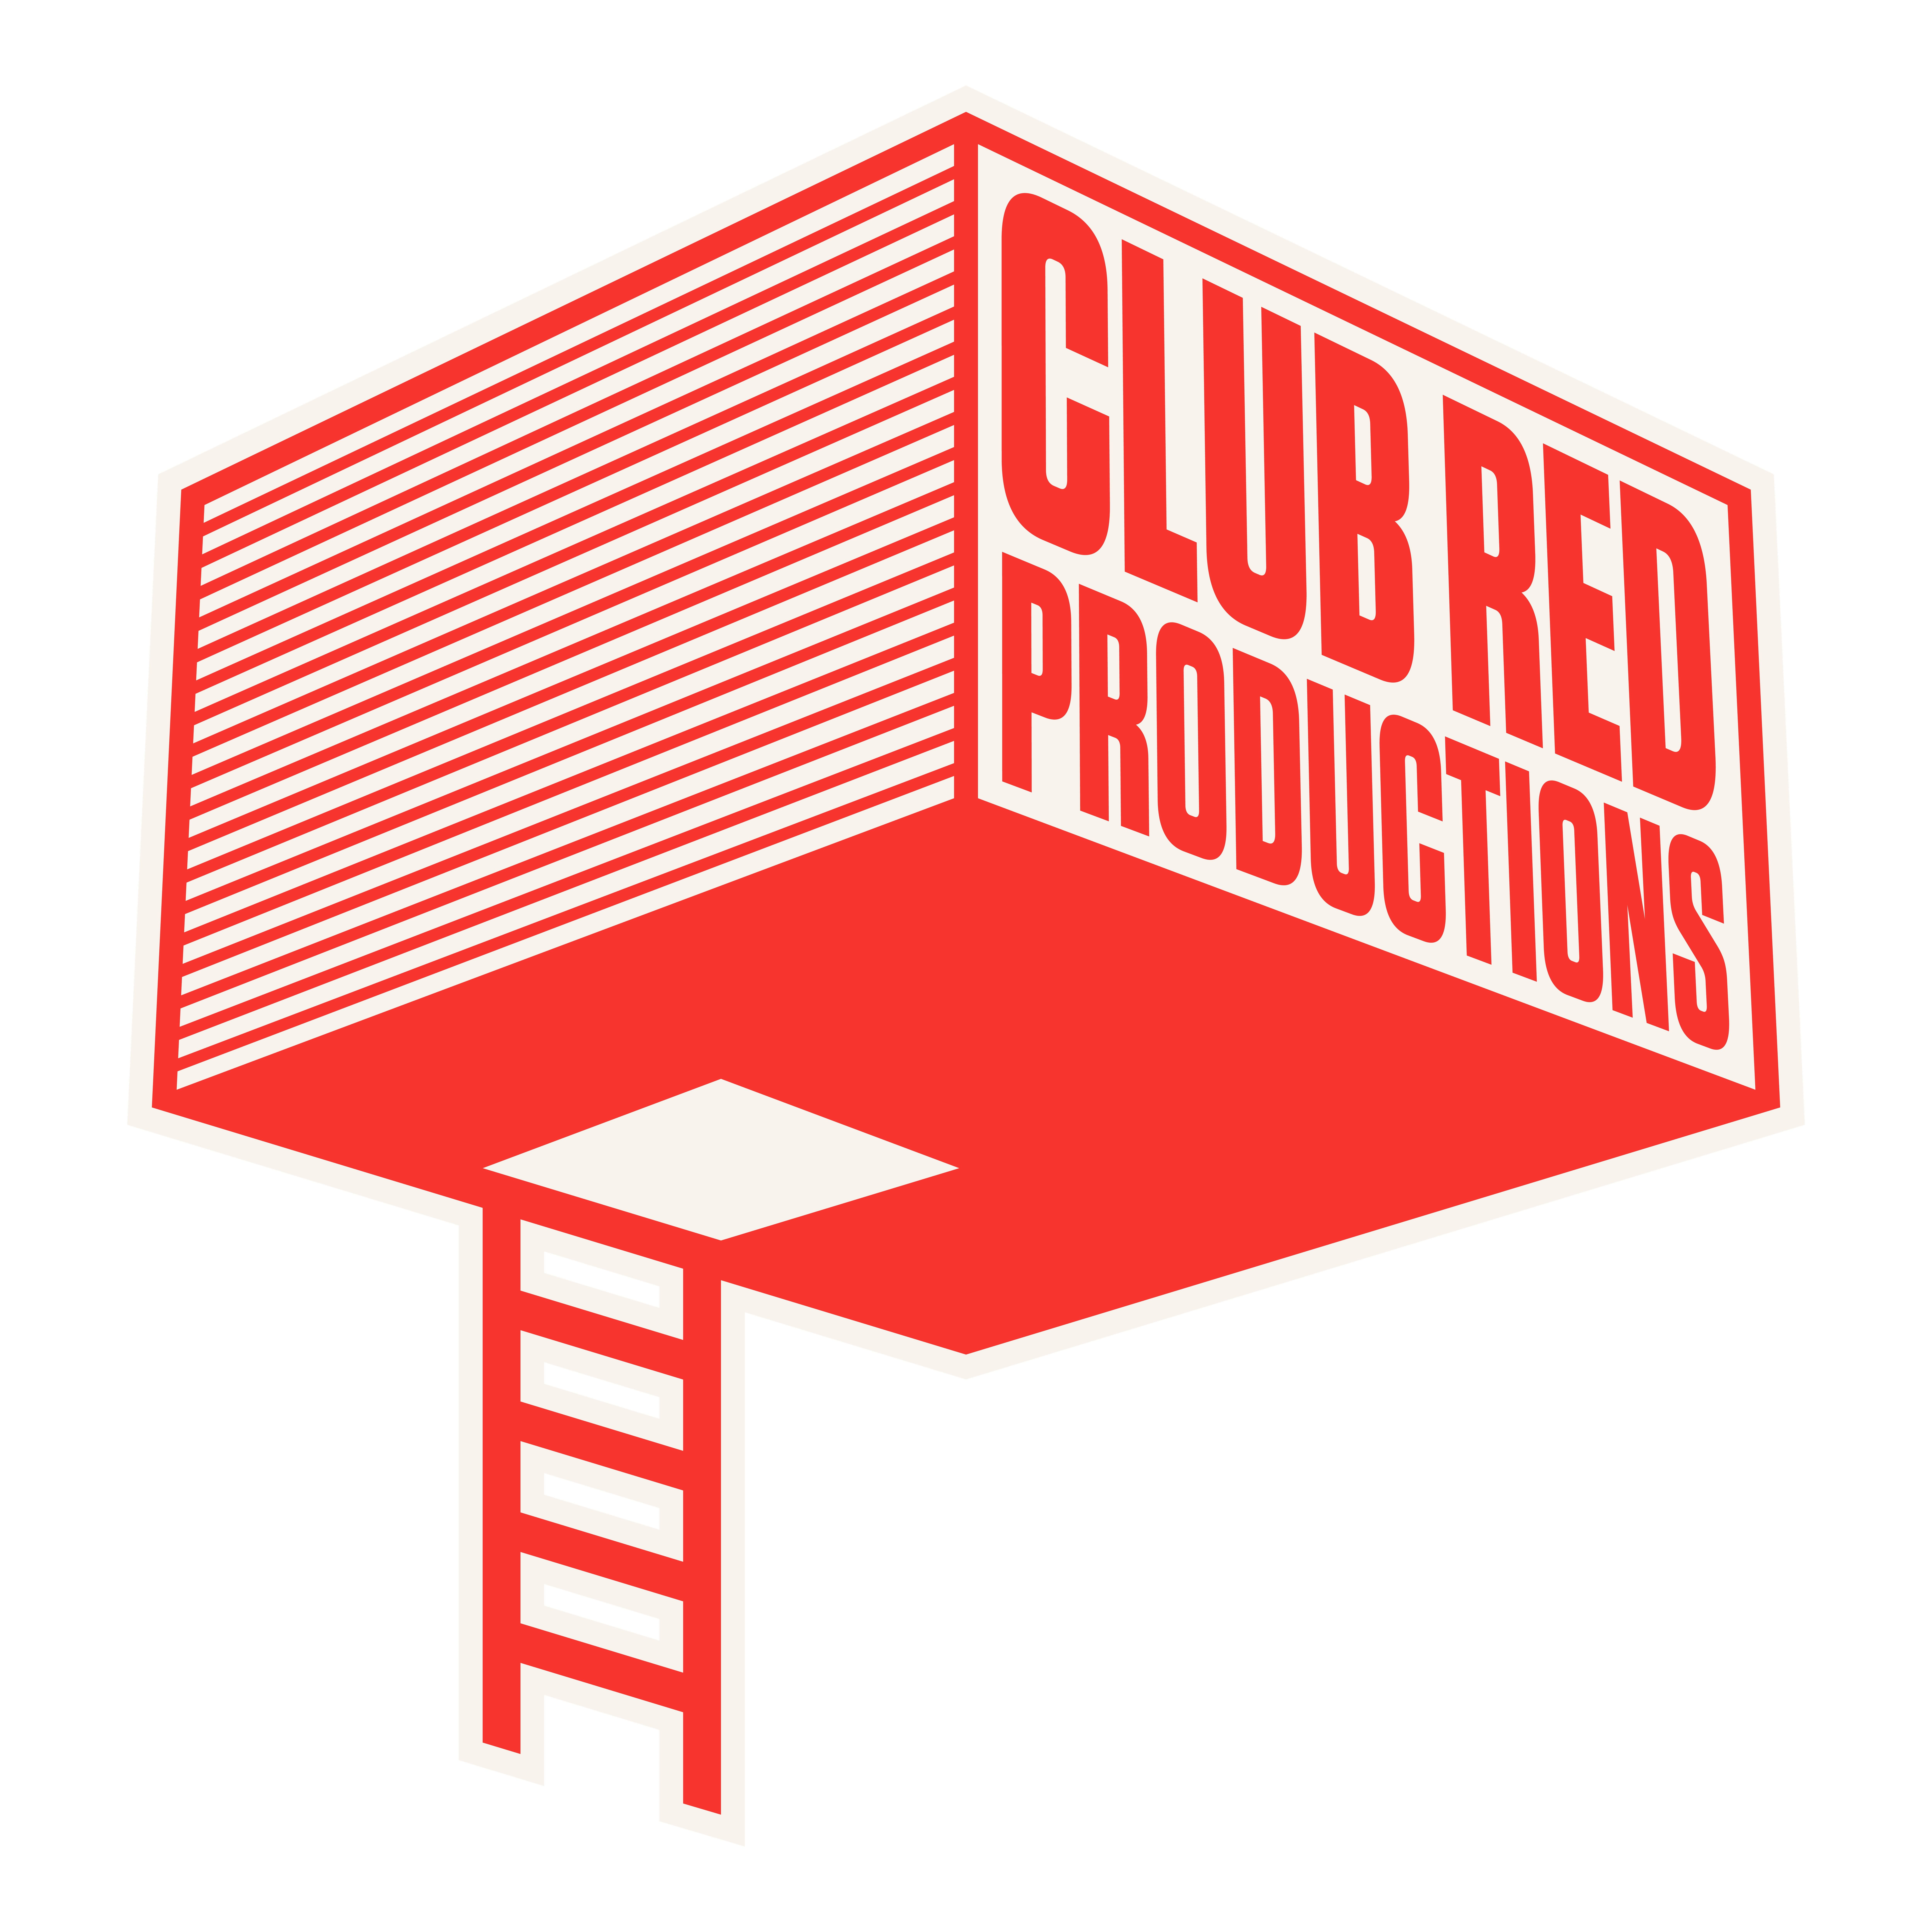 Club Red Productions